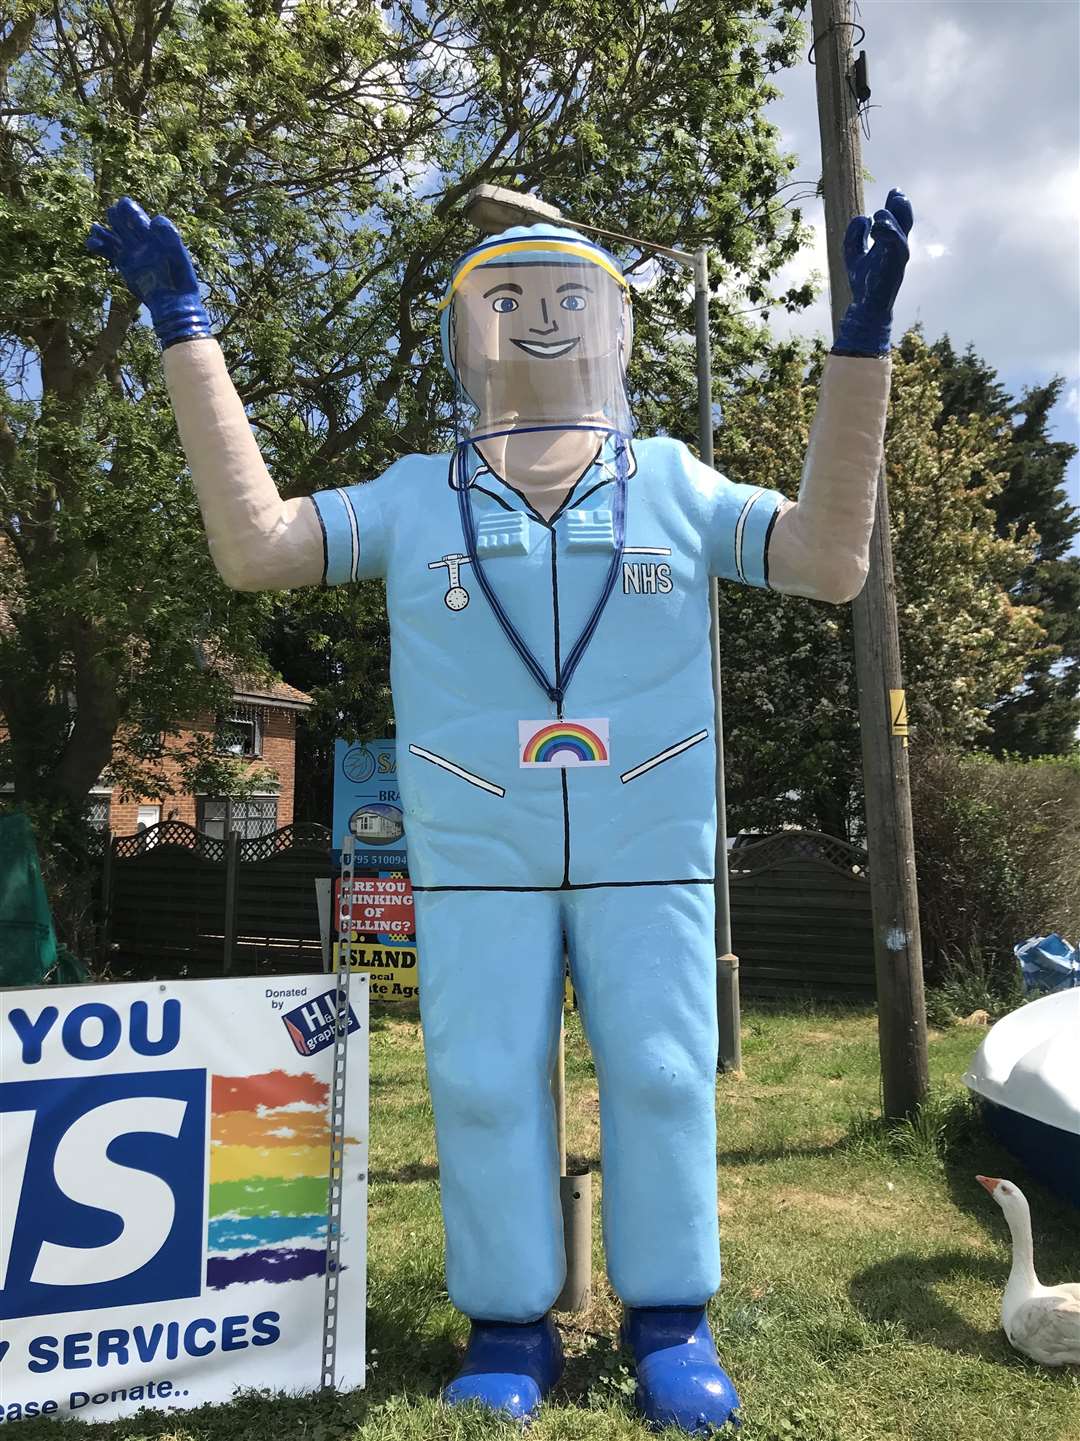 The Big Man has been painted to look like an NHS worker during the coronavirus crisis